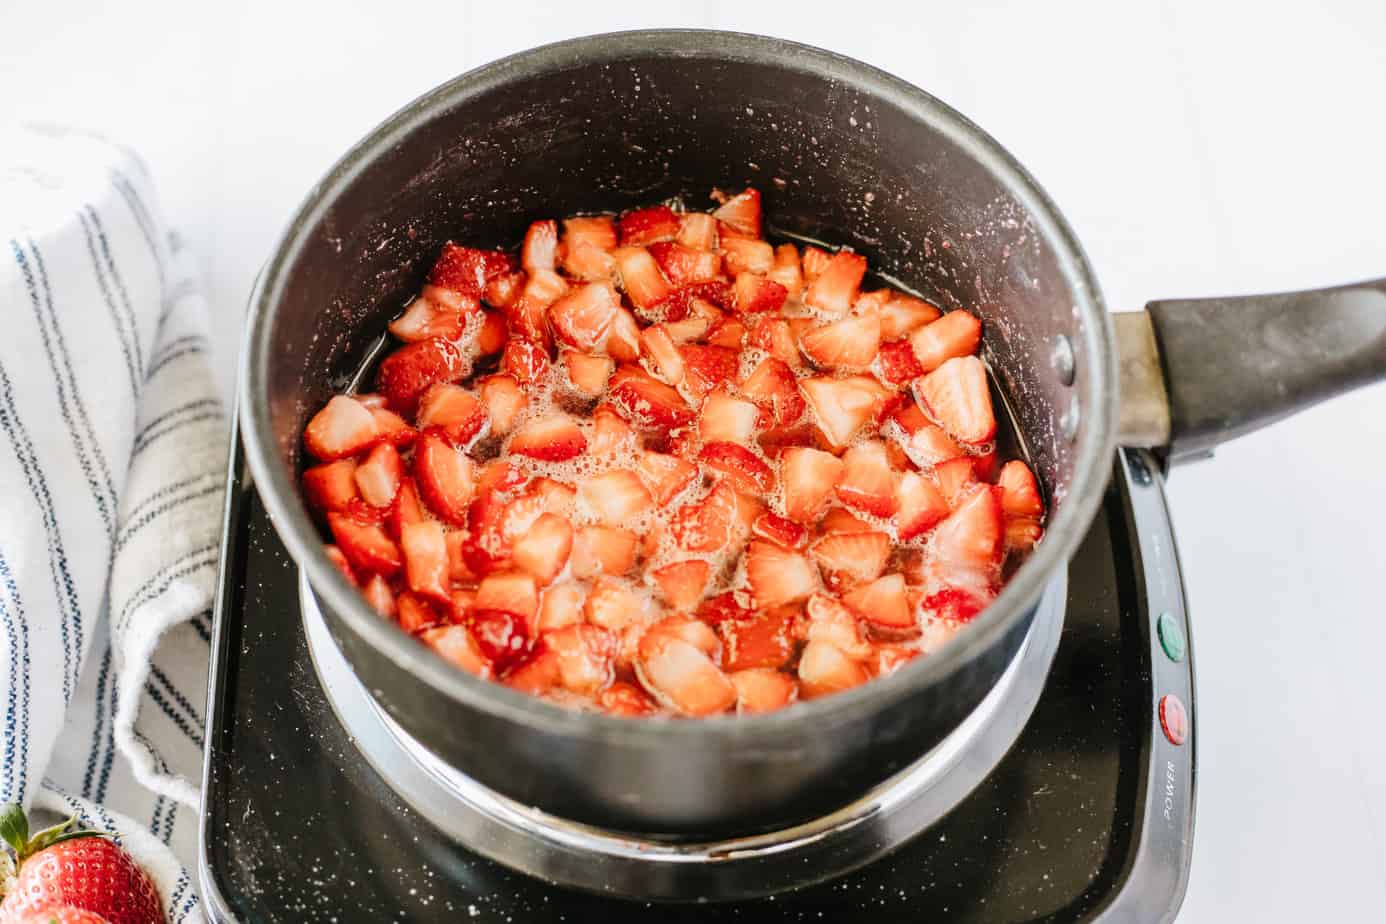 diced strawberries, sugar, lemon juice, vanilla  in a boiler on a electric cooktop cooking